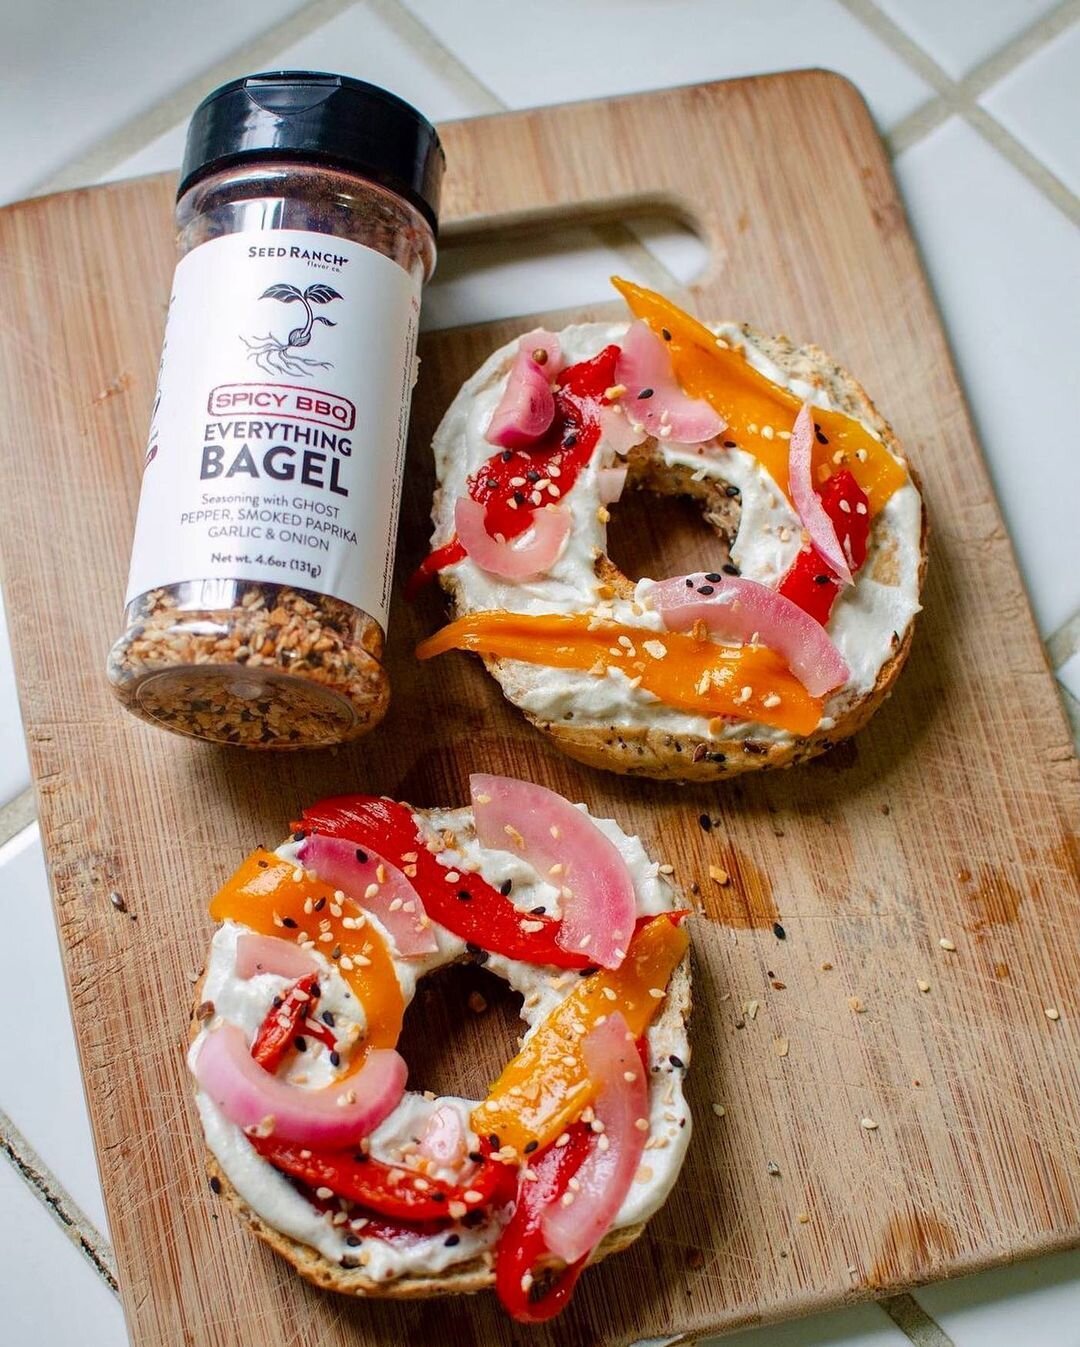 Join the flavor club with @seedranchflavor 

Featuring Plant-based sauces &amp; seasonings, you can add on these bursts of flavor on just about anything to spice it up🔥Try their products like the Spicy BBQ Everything Bagel seasoning, Smoked Jalape&n